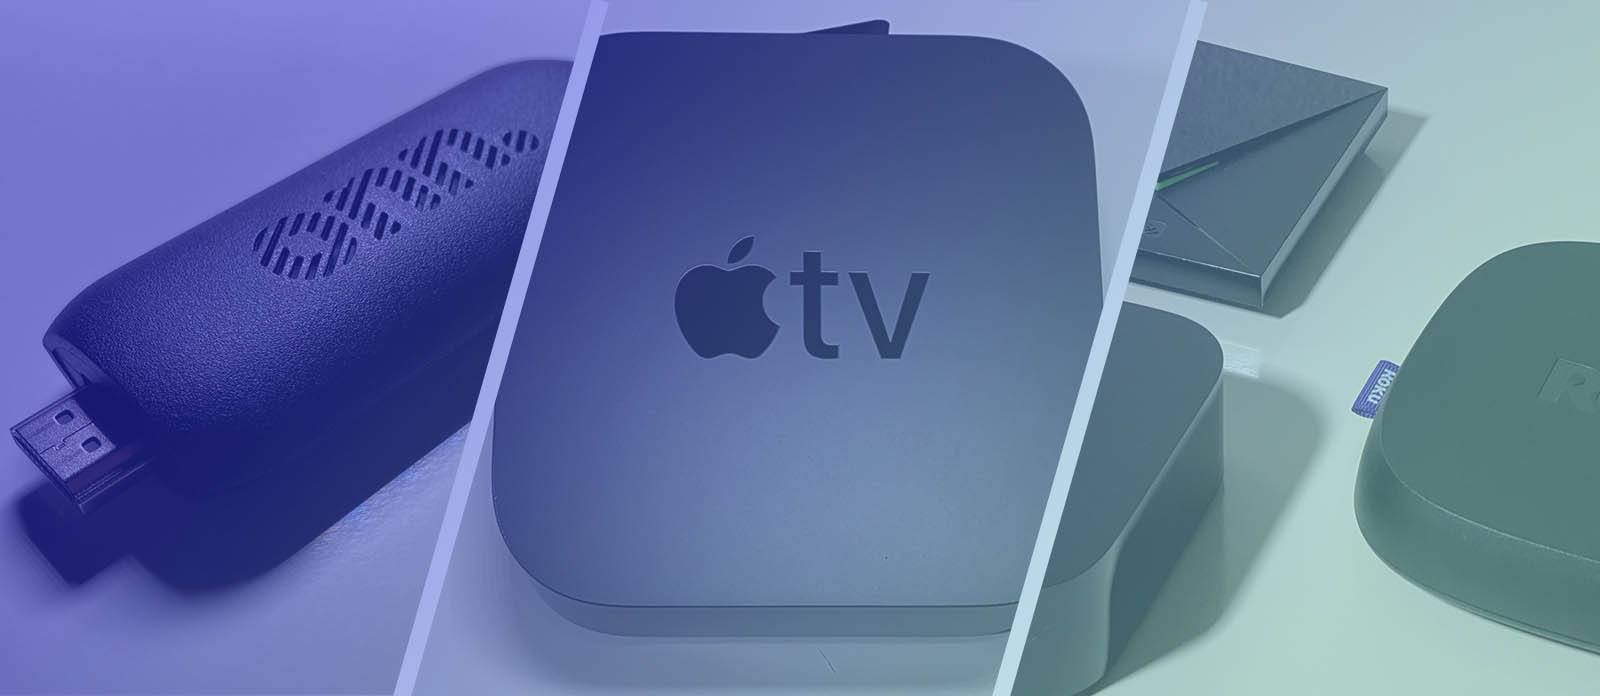 ICYMI June 2021: Cord Cutters News Tests the New Apple TV 4K, onn. FHD Streaming Stick and More